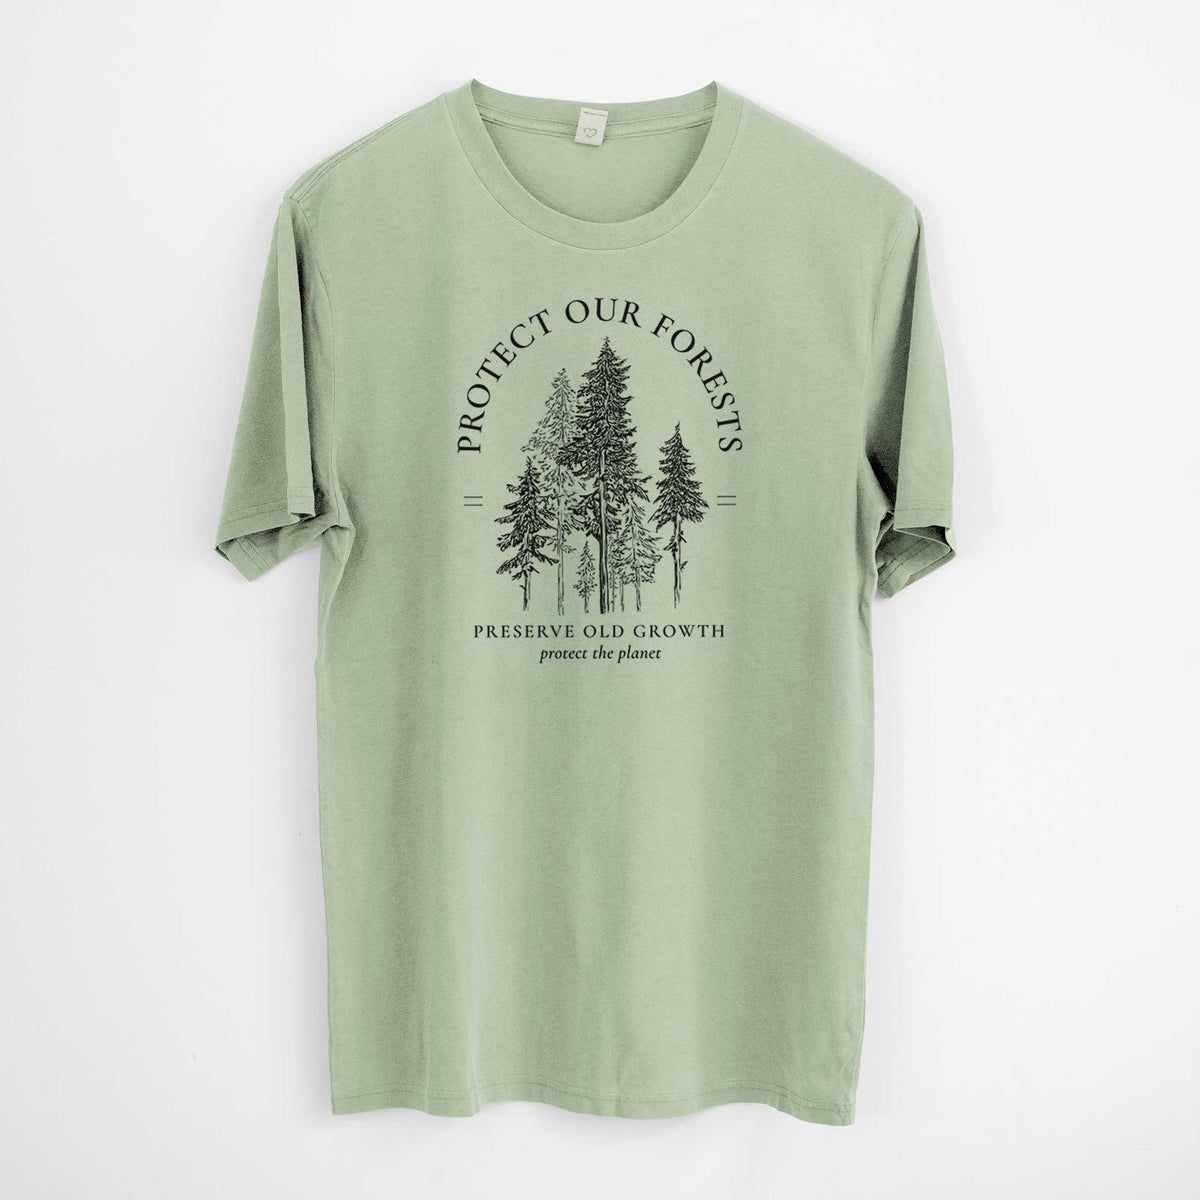 Protect our Forests - Preserve Old Growth -  Mineral Wash 100% Organic Cotton Short Sleeve